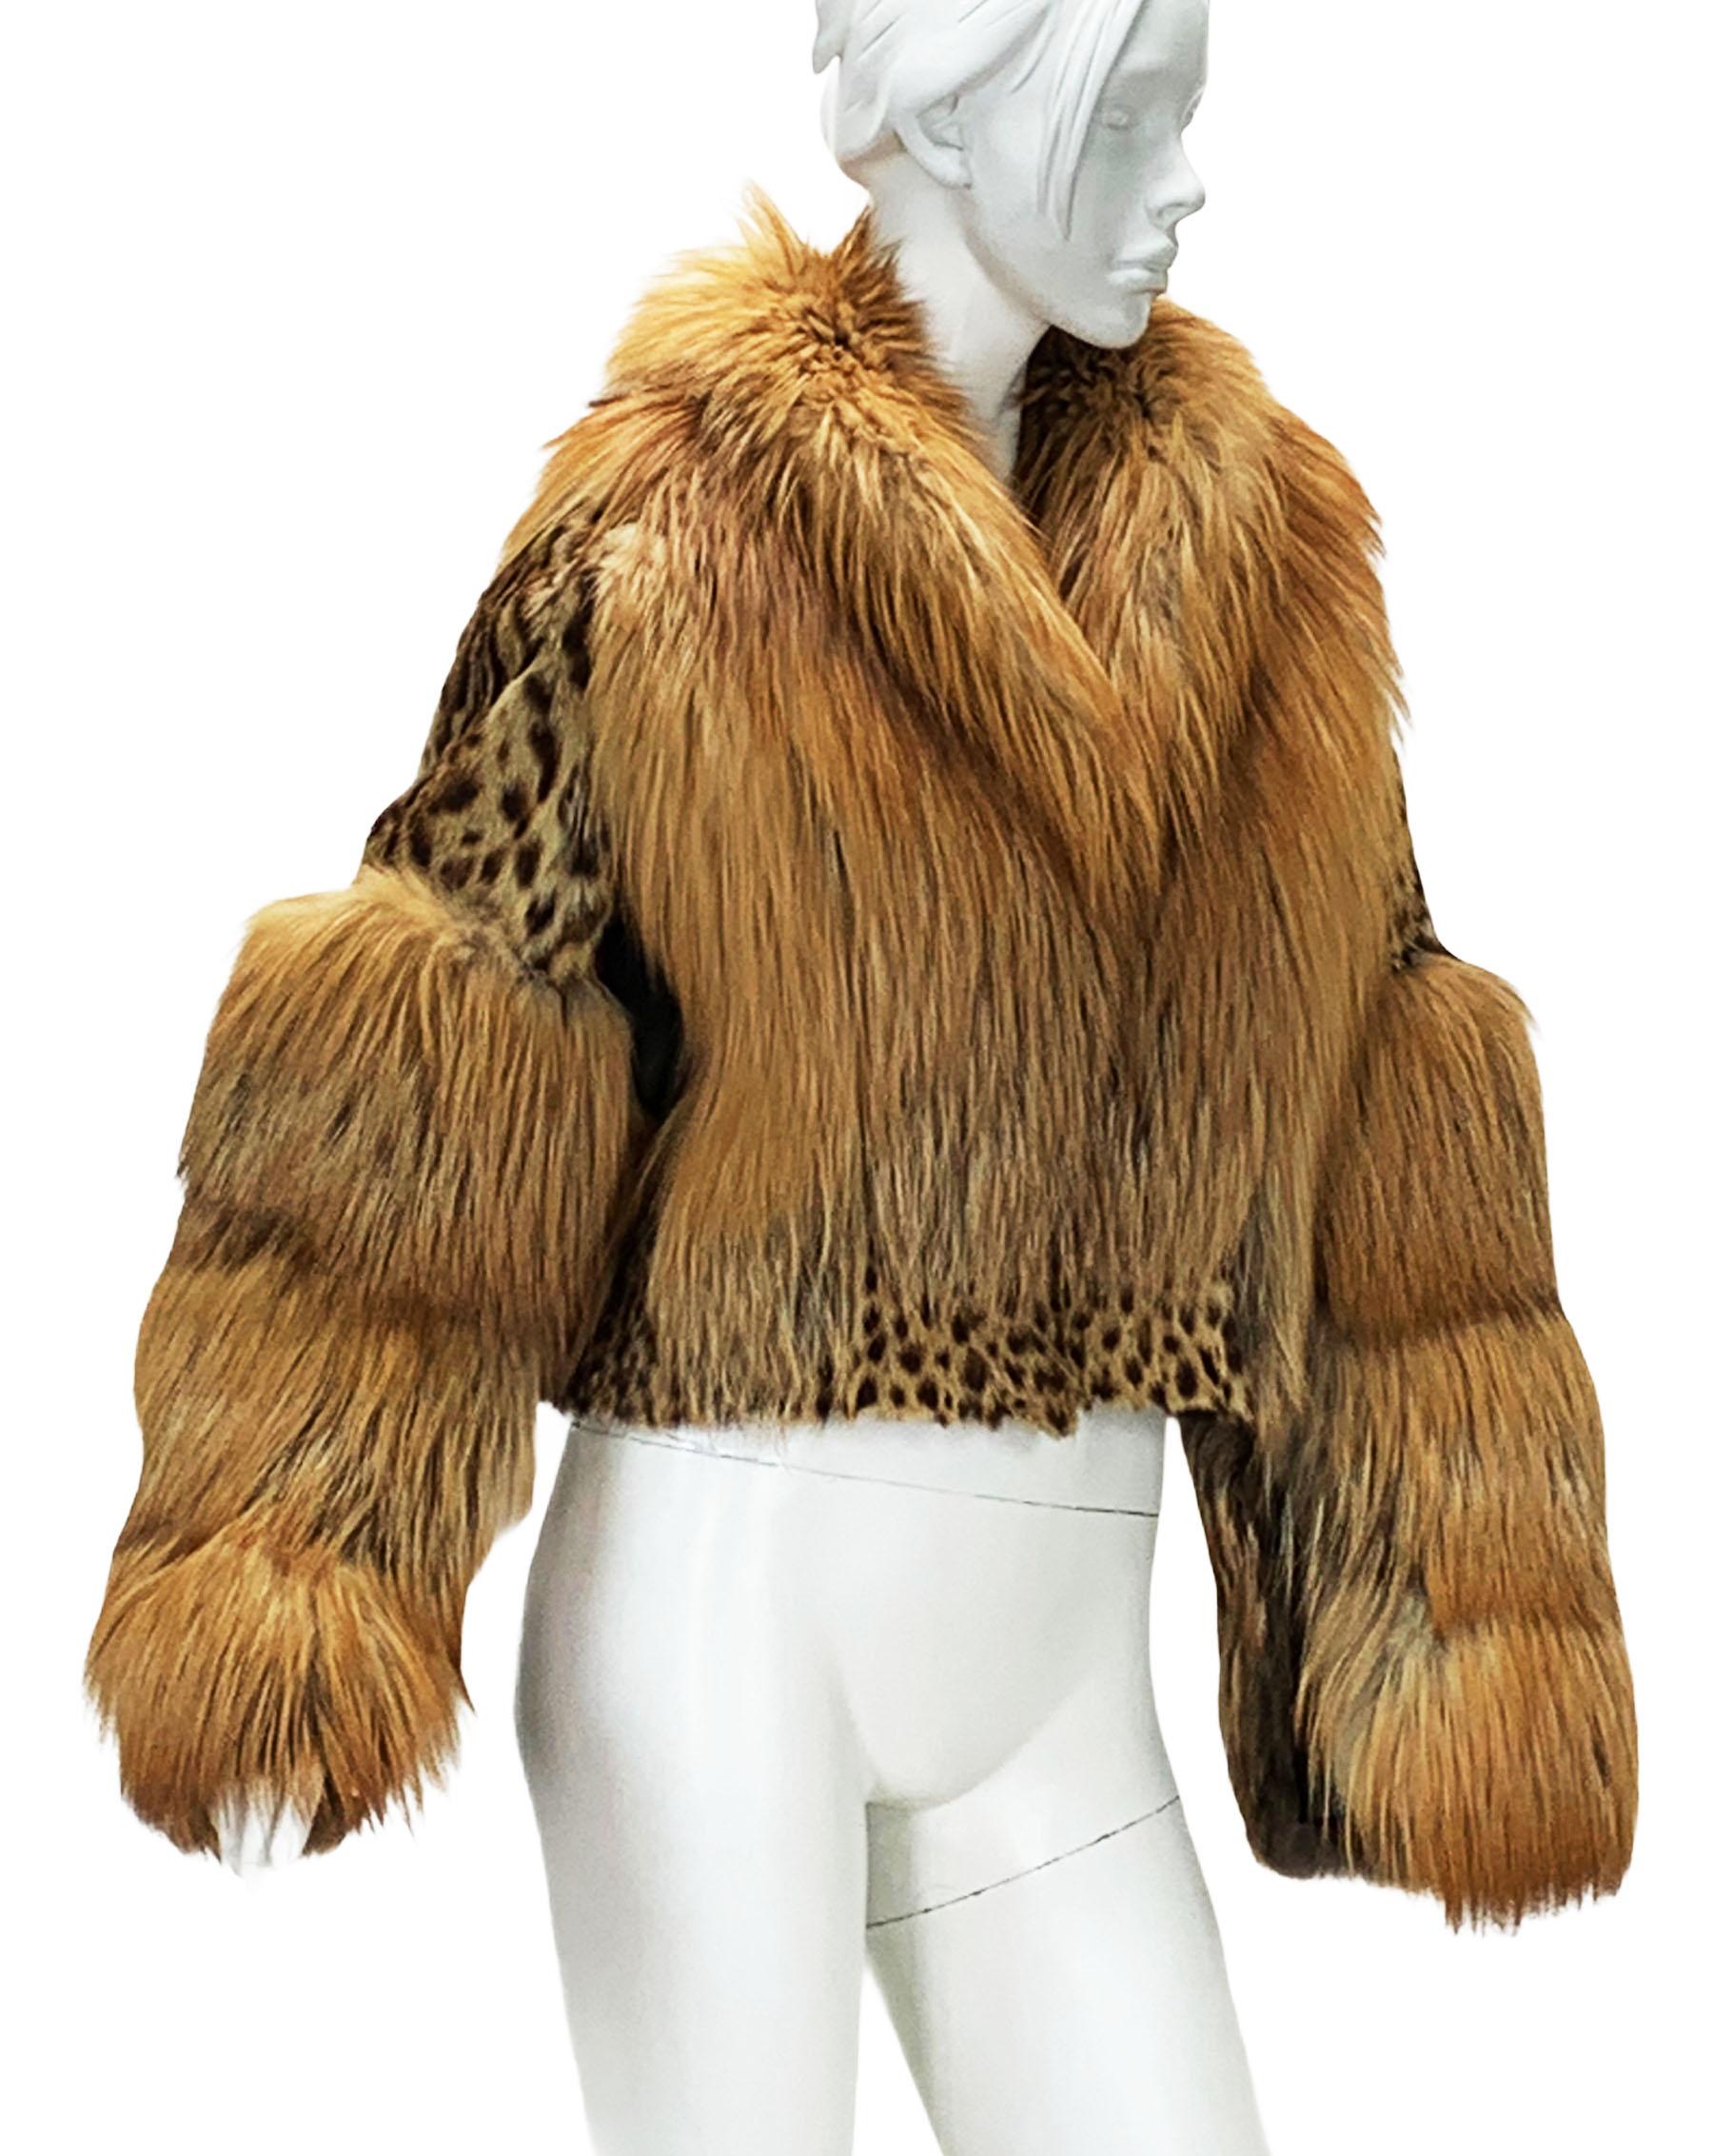 Museum Tom Ford for Gucci Runway F/W 1999 2 in 1 Fur Coat Jacket  For Sale 8